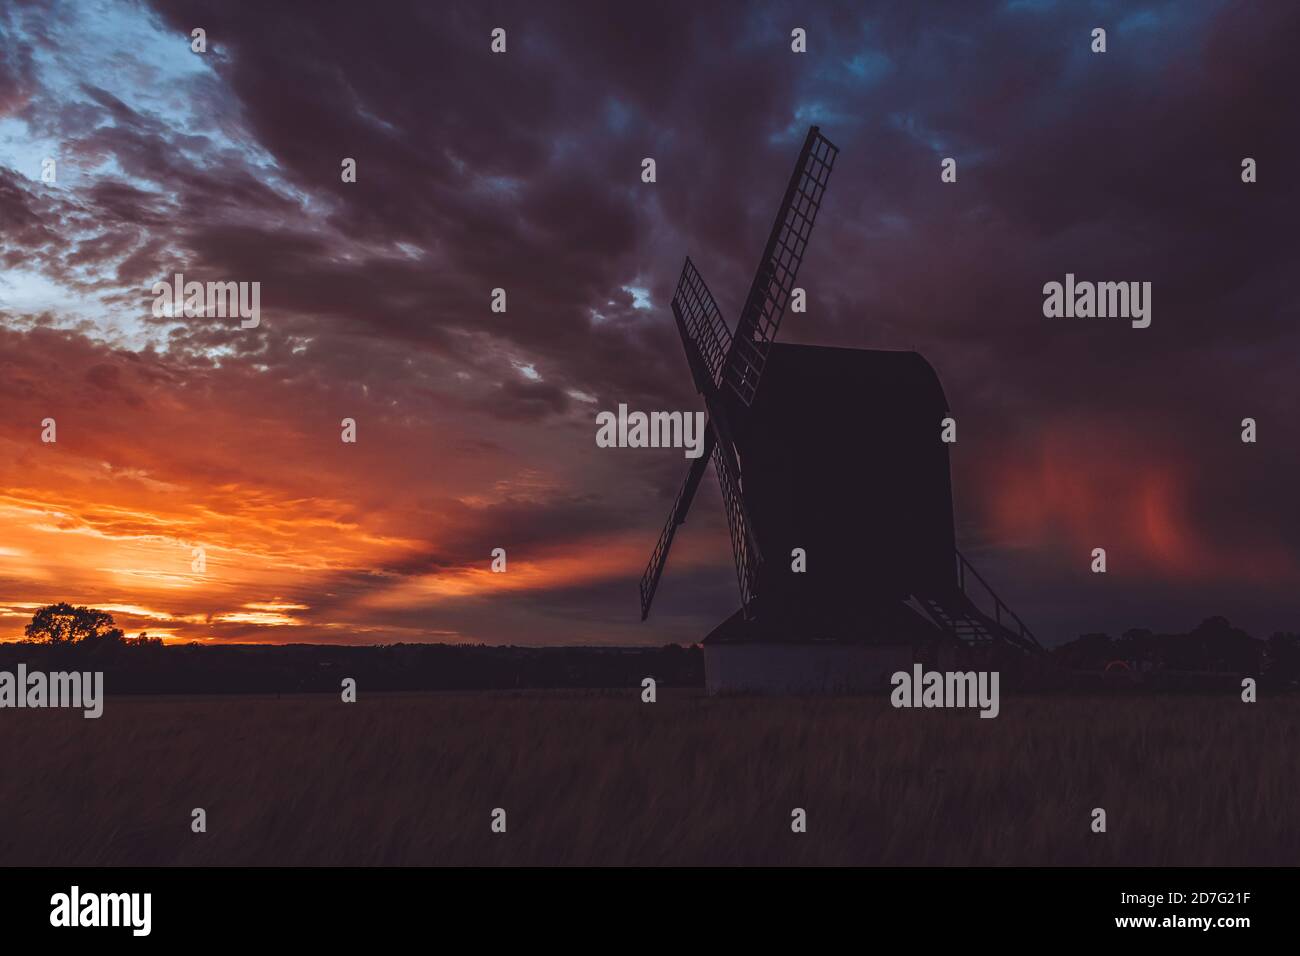 Pitstone, United Kingdom - 31 July 2020: Stunning sunset landscape view for Pitstone Windmill with dramatic cloudy sky and beautiful colors of sun Stock Photo